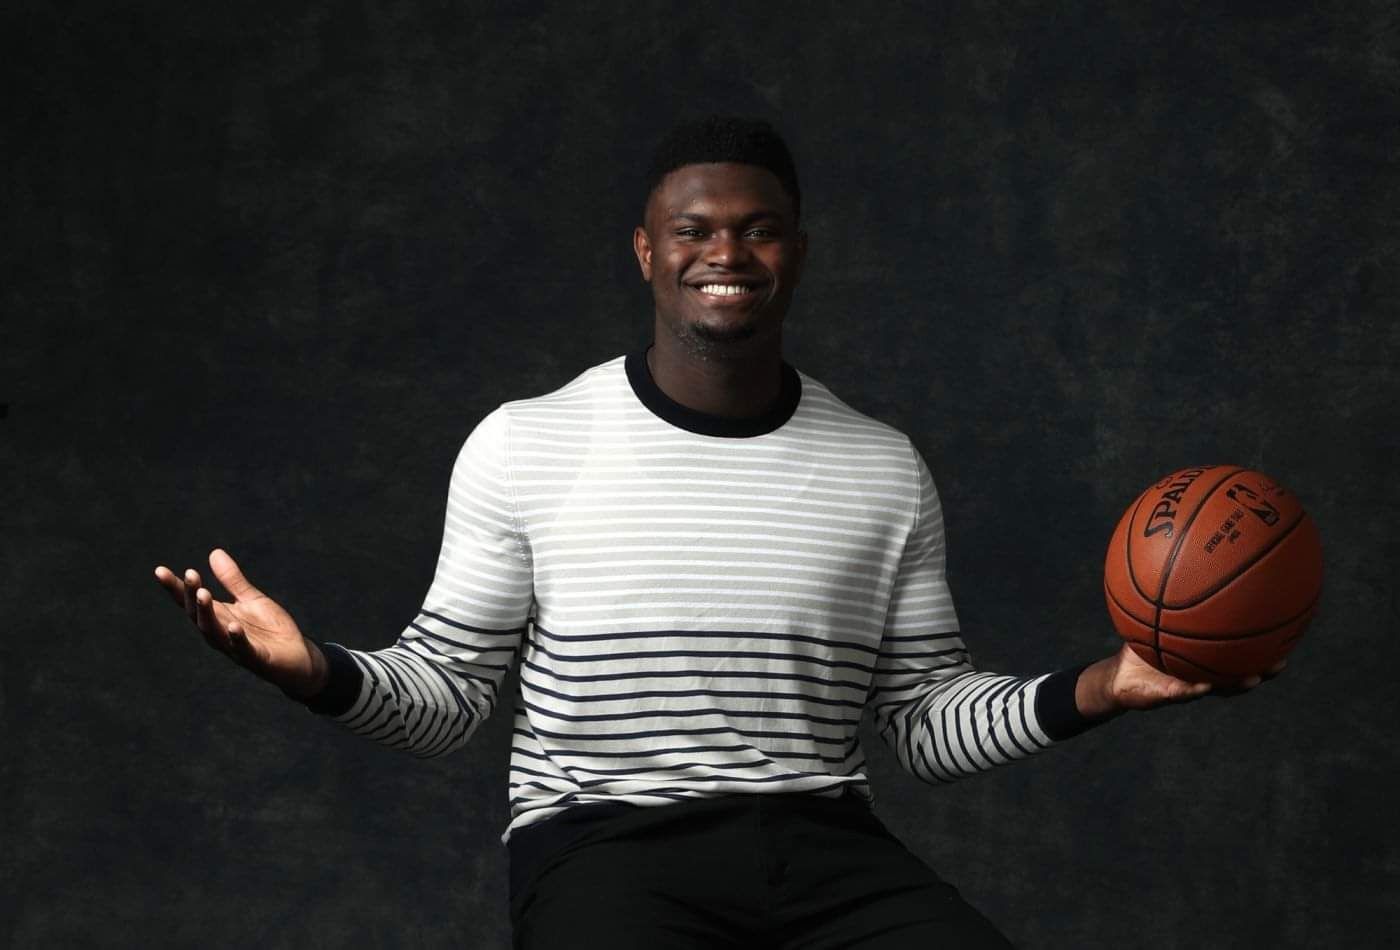 NBA: Zion Williamson's foot injury to keep him out of action